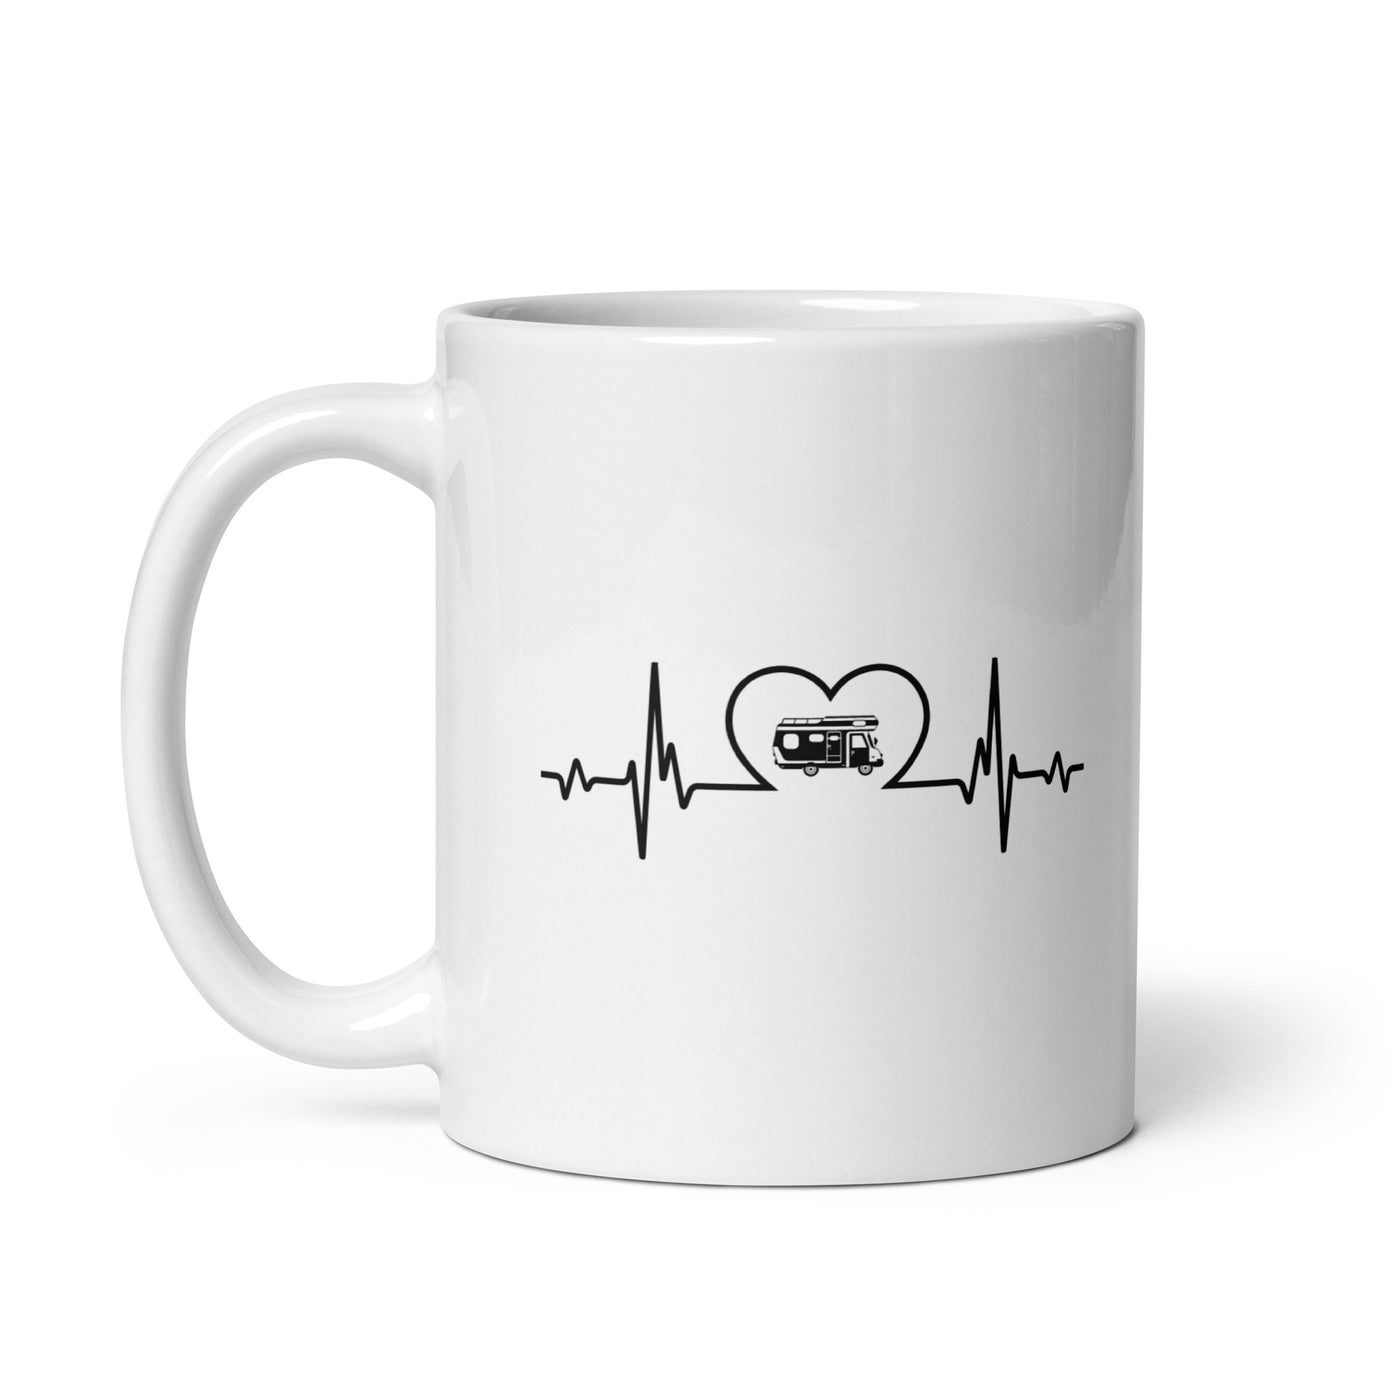 Heartbeat Heart And Camping 2 - Tasse camping 11oz